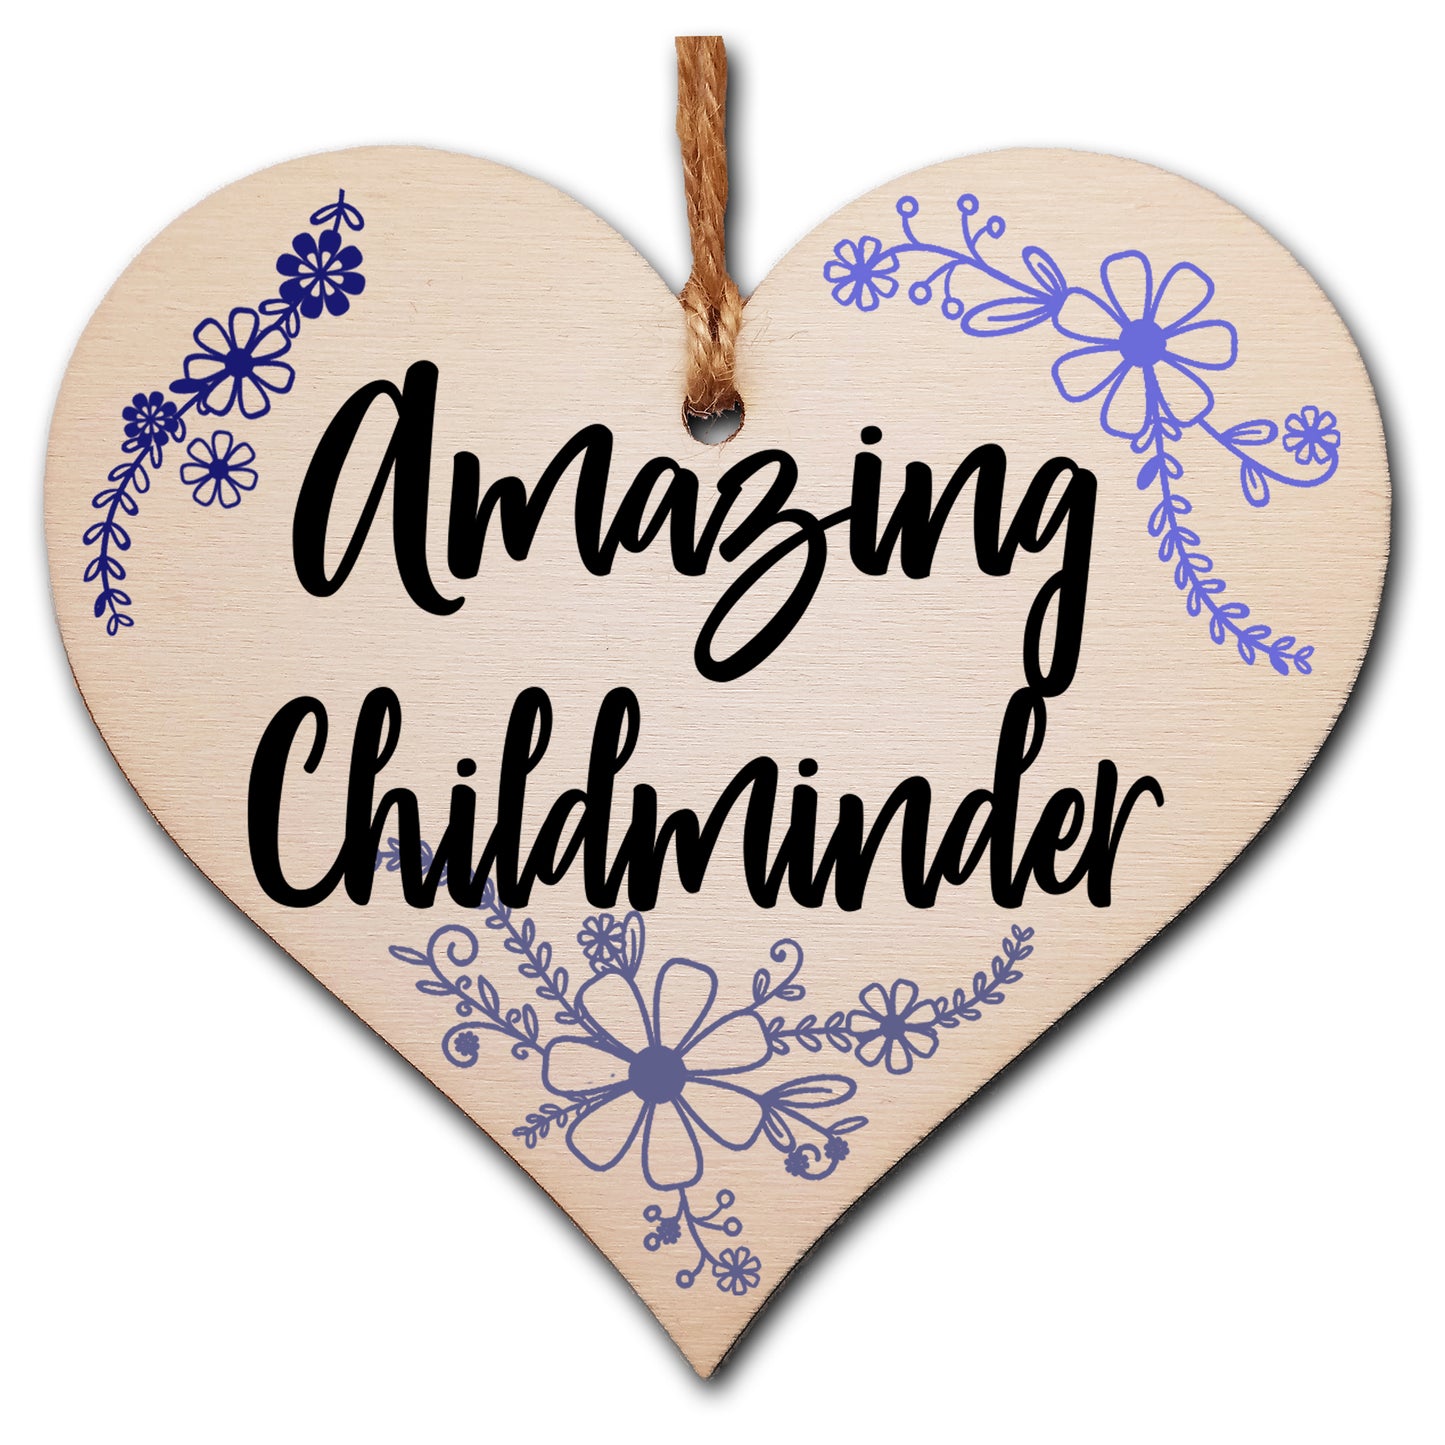 Handmade Wooden Hanging Heart Plaque Gift for a Amazing Childminder Thank You Keepsake